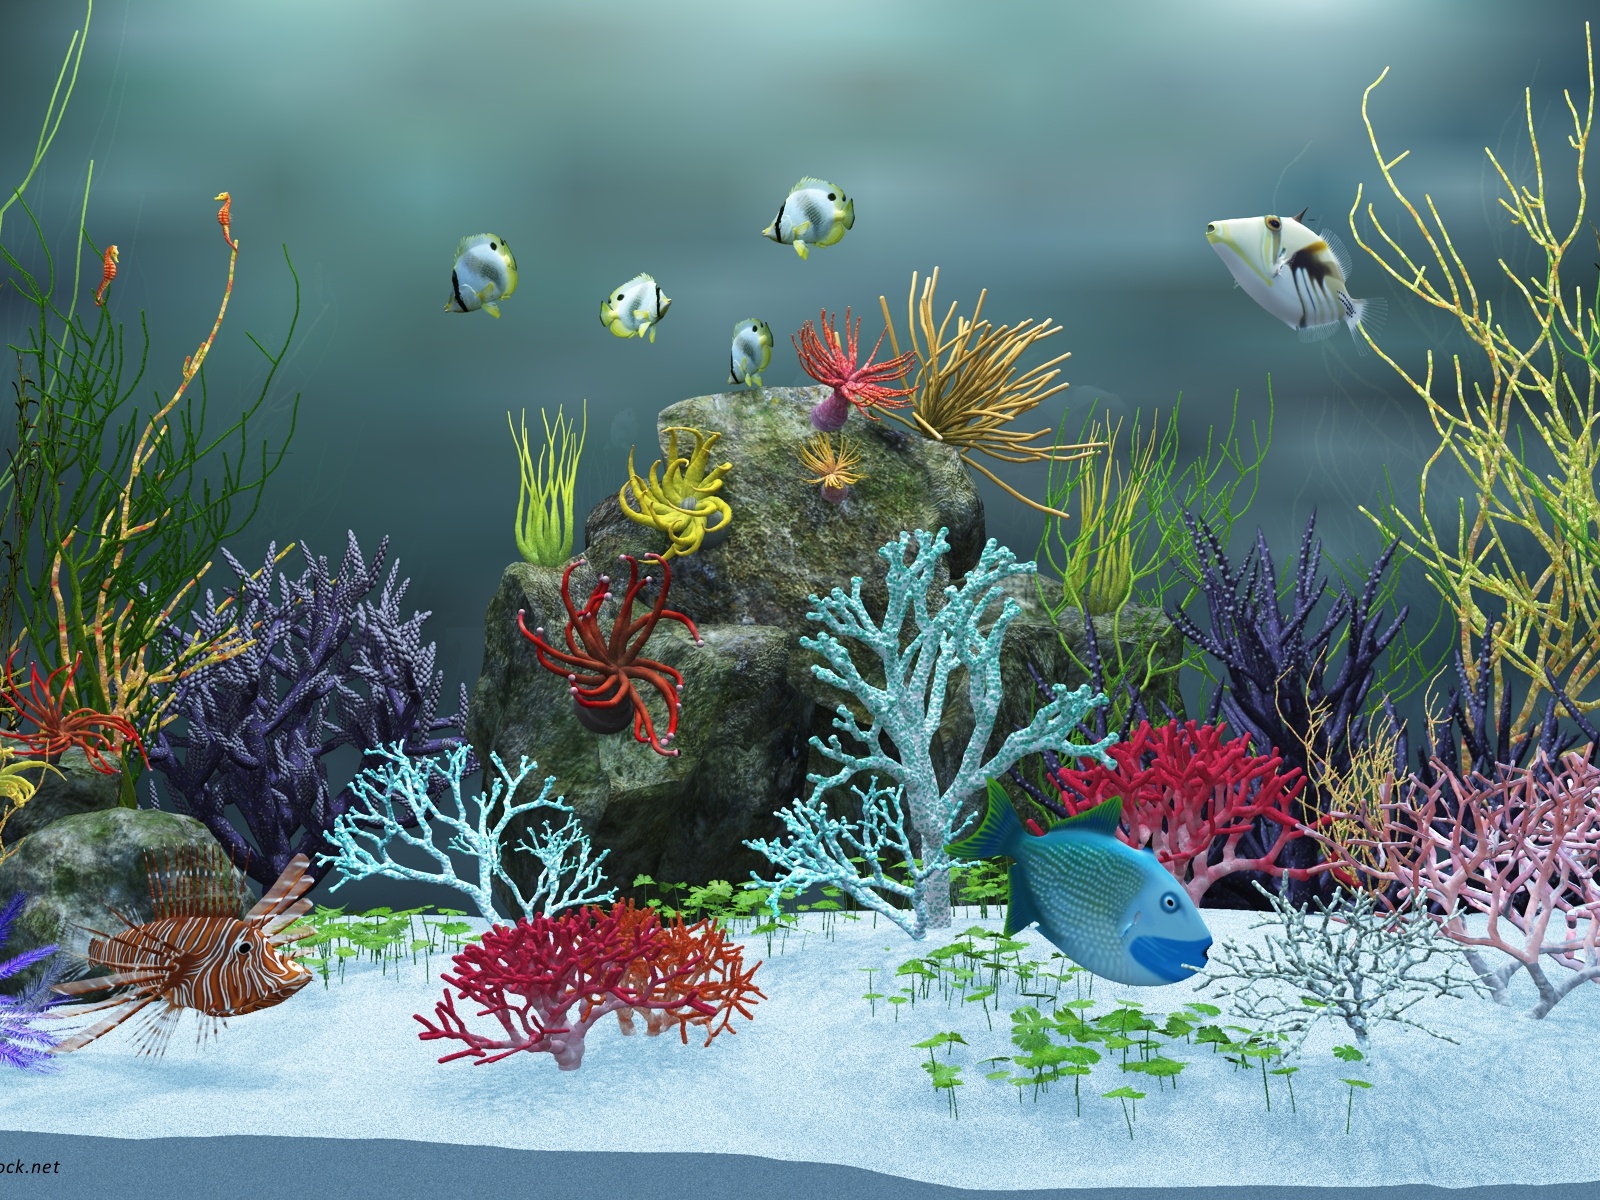 Underwater World Post, Various Fishes Are Swimming, Colorful Sea Plants, a Clean World--1600X1200 free wallpaper download